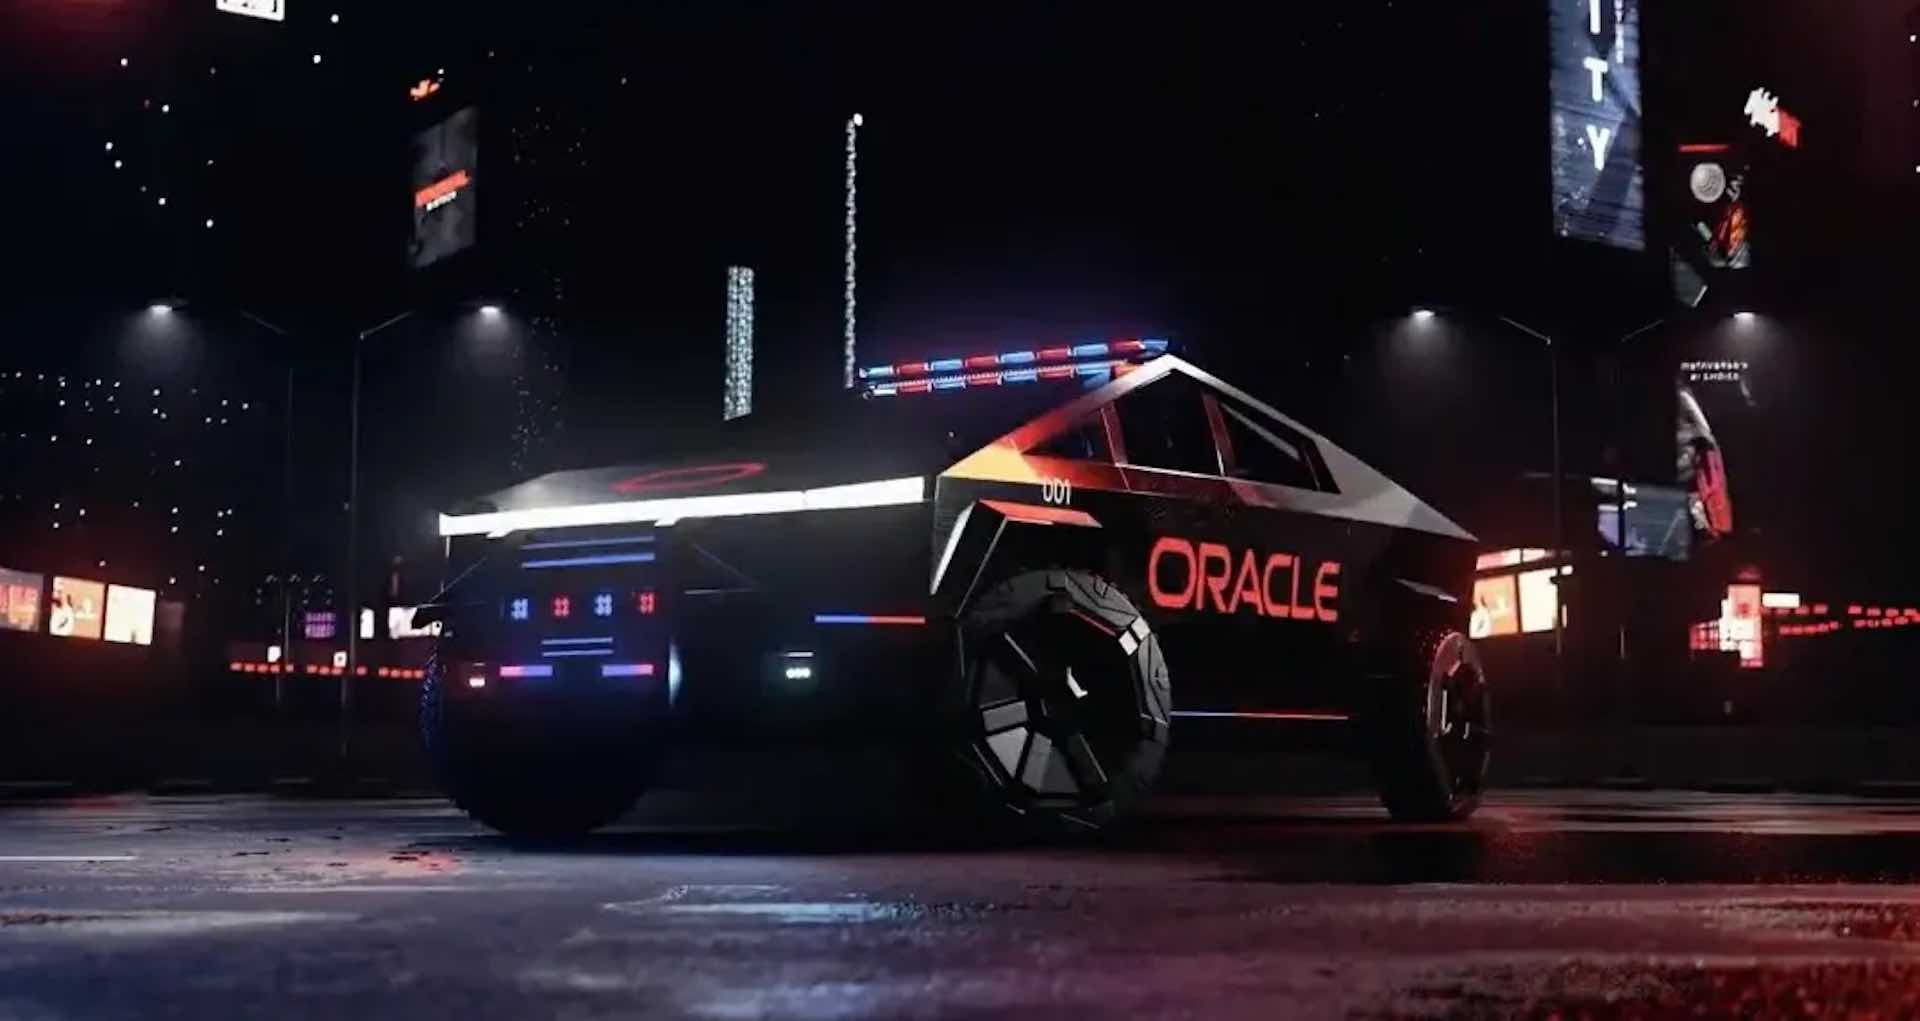 The Tesla Cybertruck imagined as a police vehicle